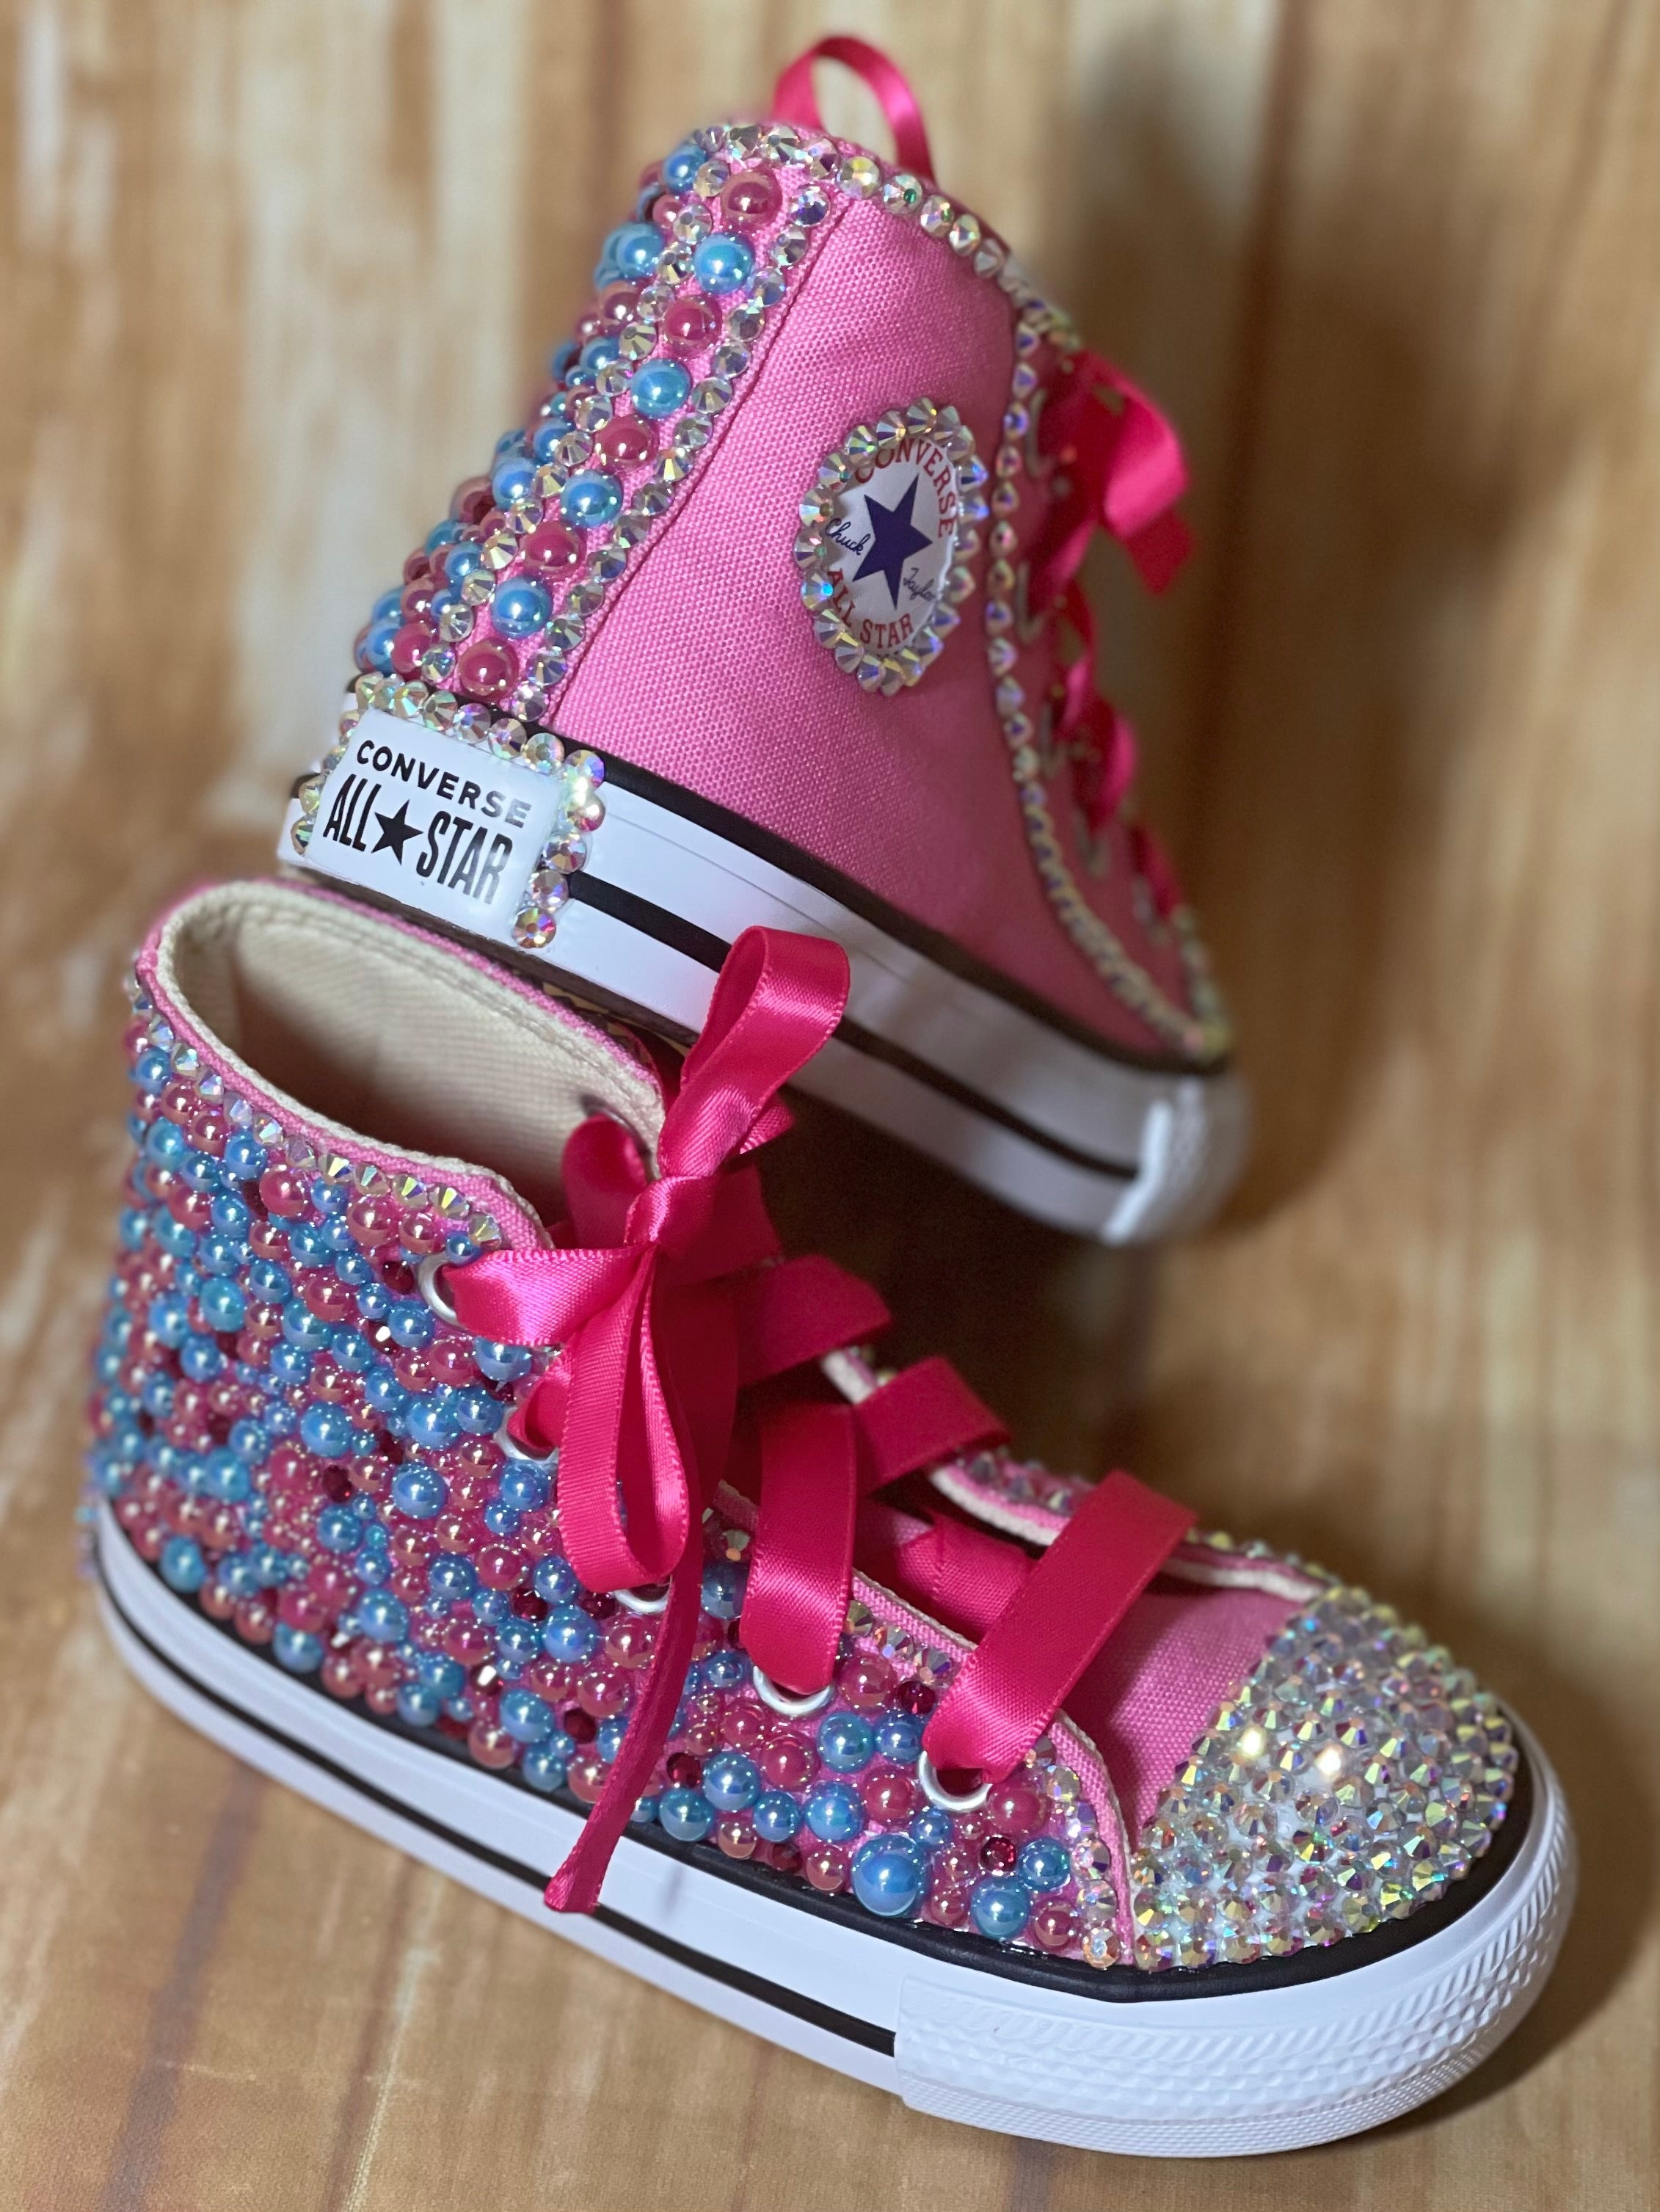 Pink & Turquoise Blinged Converse Shoes, Little Kids Shoe Size 11-3